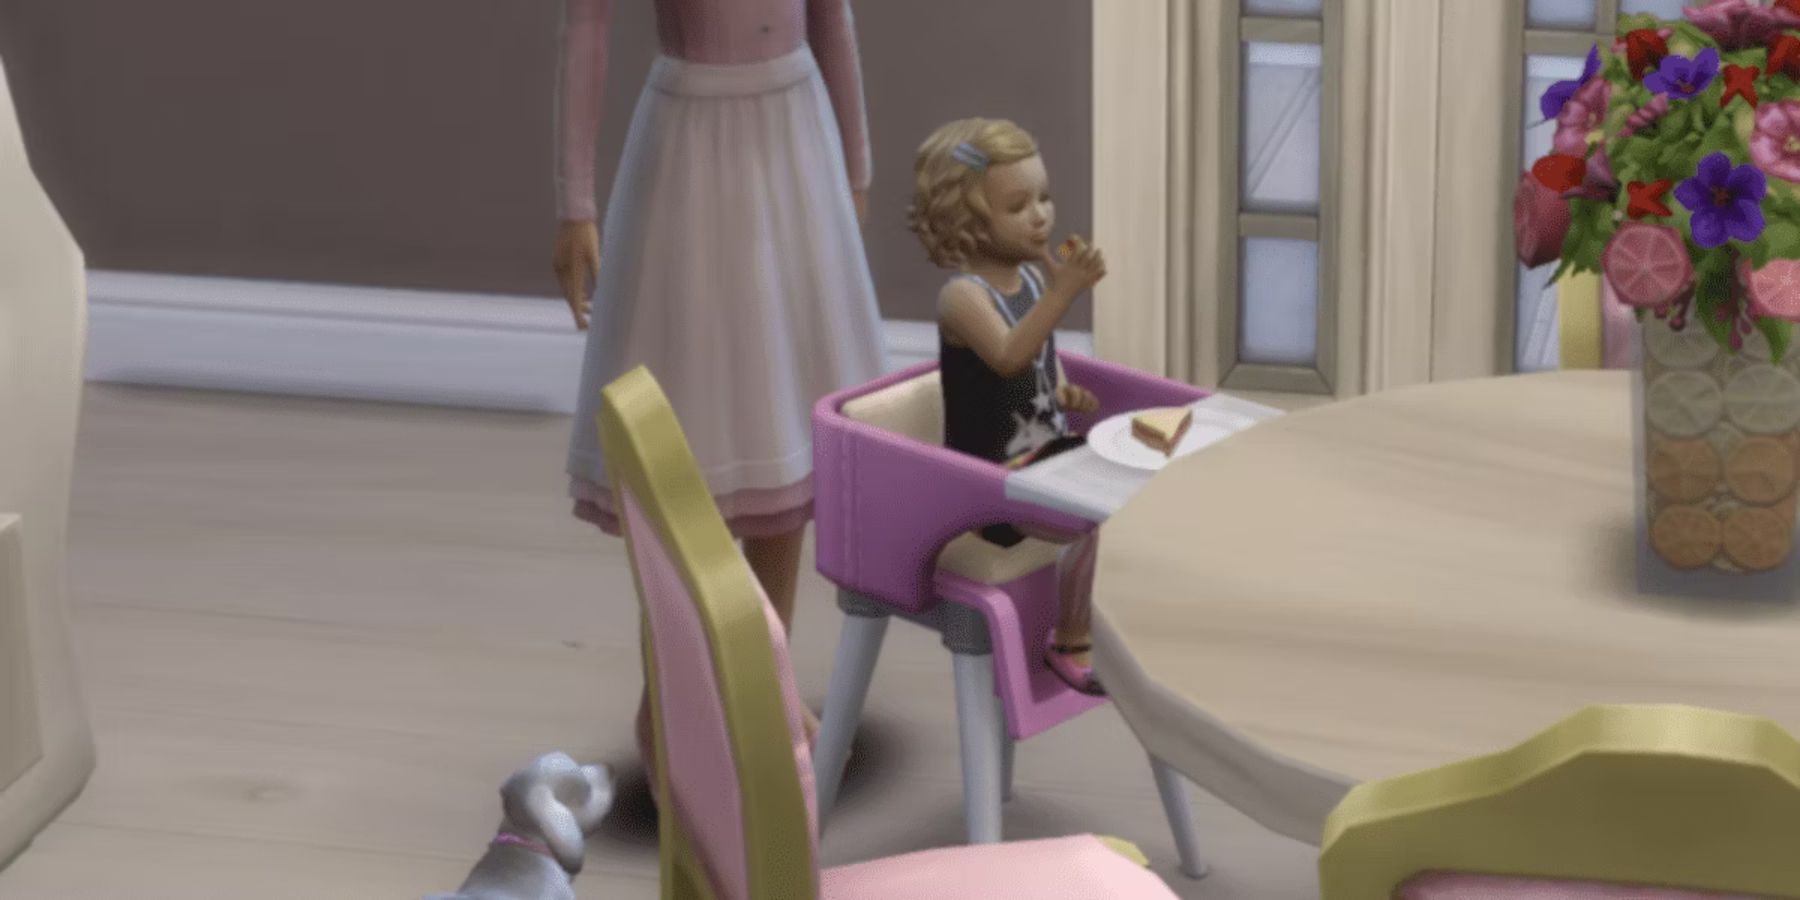 A toddler eating in The Sims 4